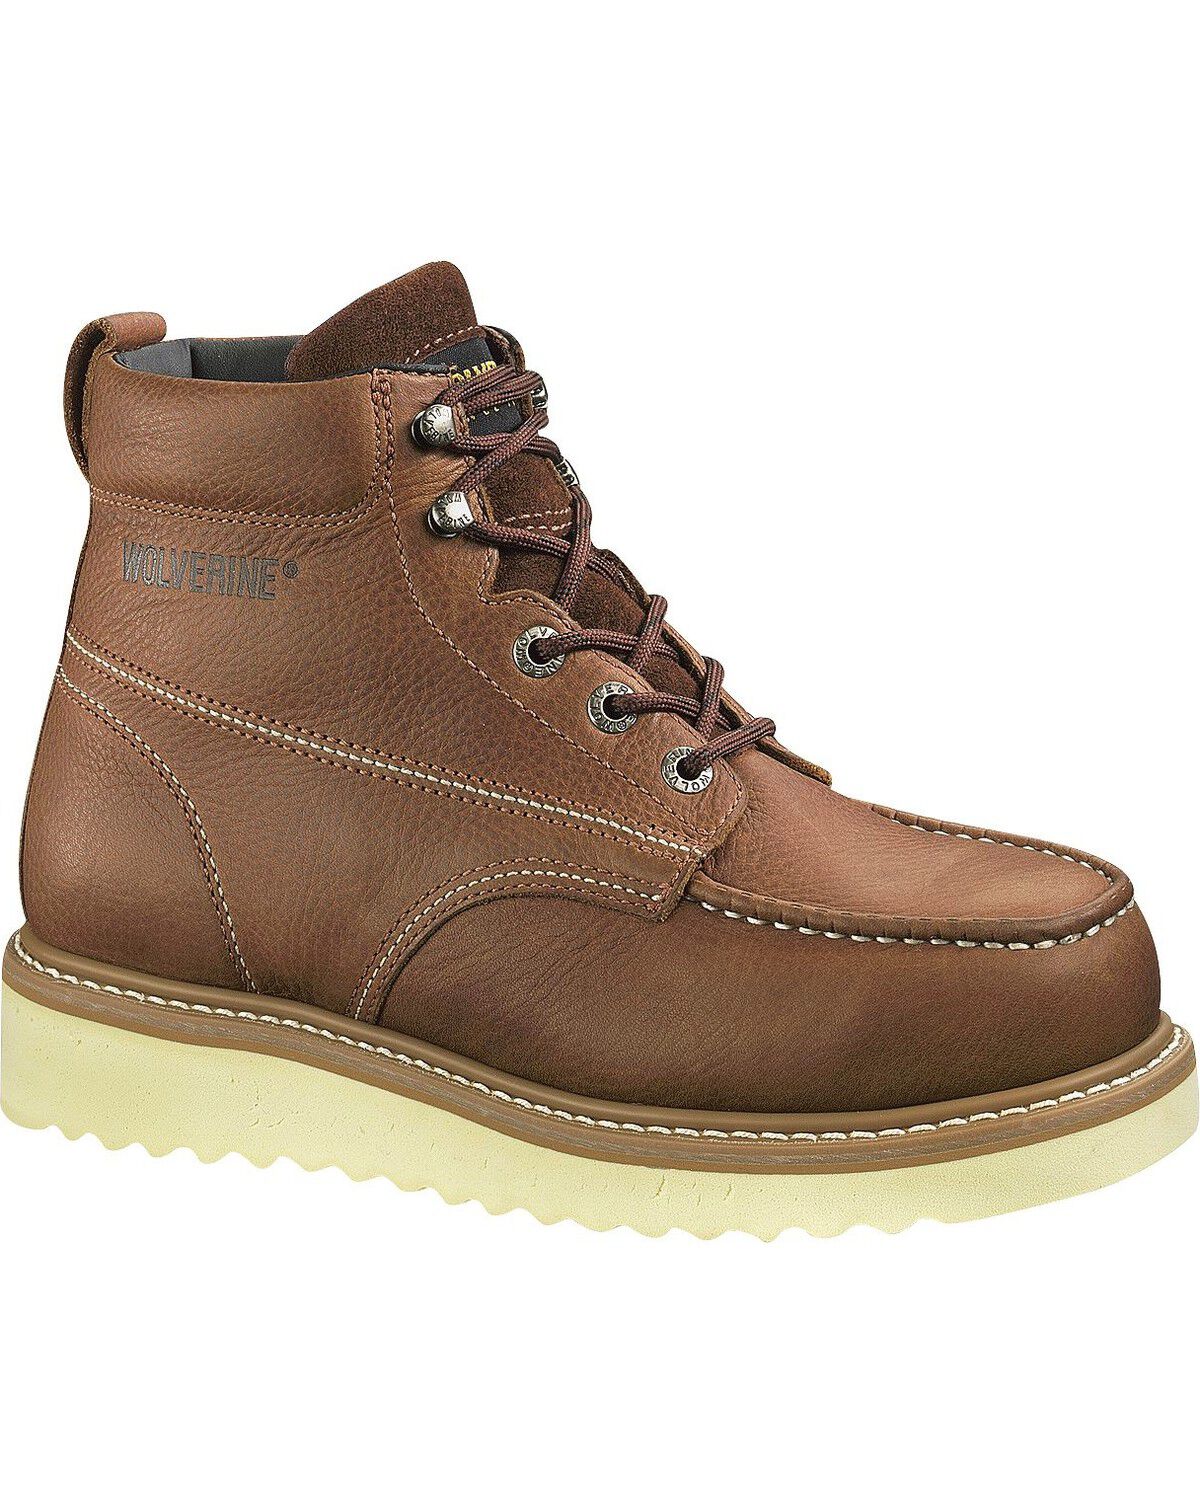 wolverine safety boots uk